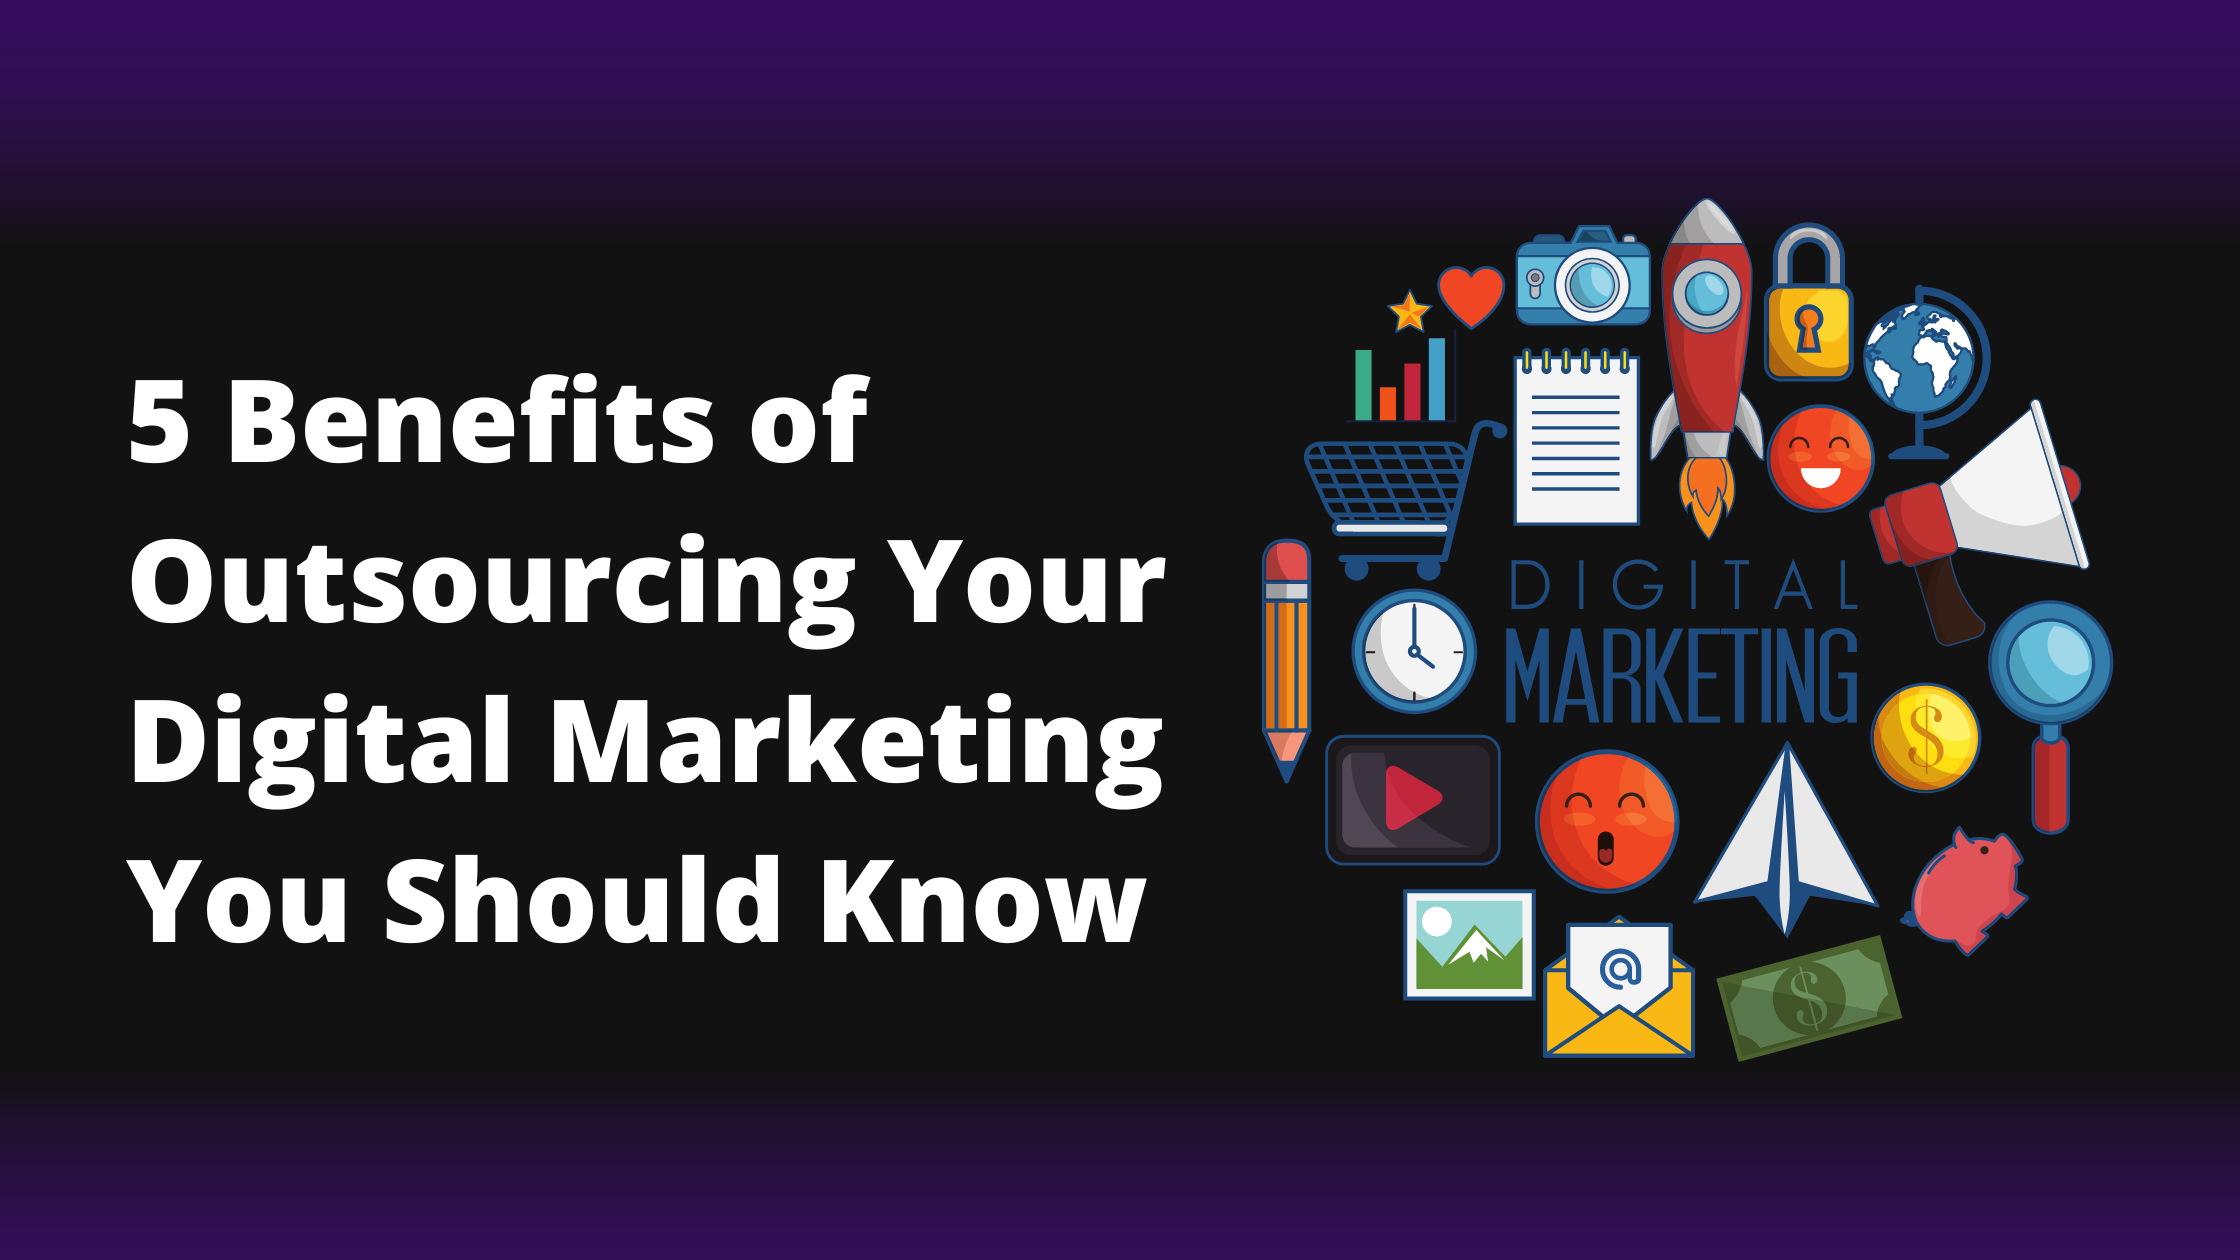 5 Benefits Of Outsourcing Your Digital Marketing You Should Know